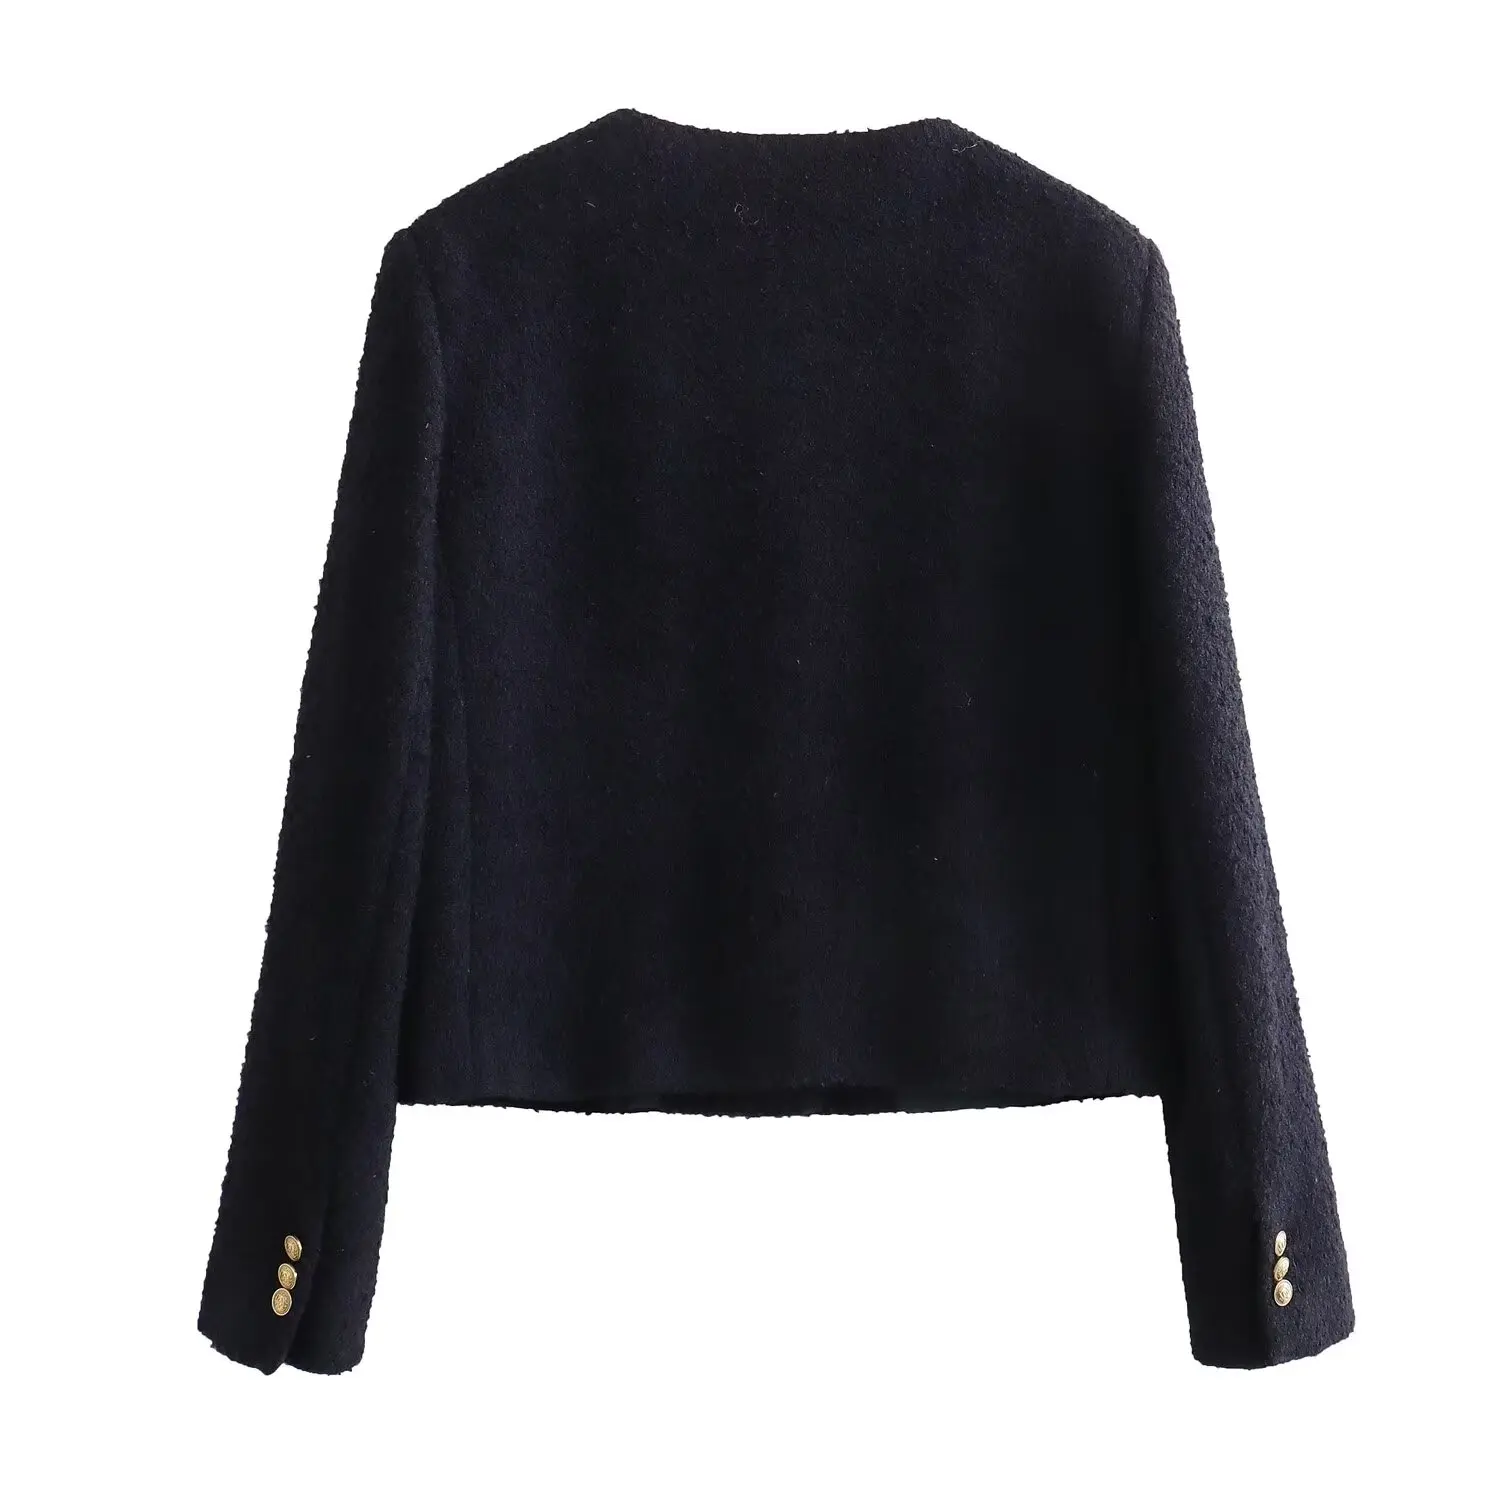 Jenny&Dave Vintage Gold Buttons Casual WInter Coat Women Tops French Elegant Chenille Navy Woolen Jacket